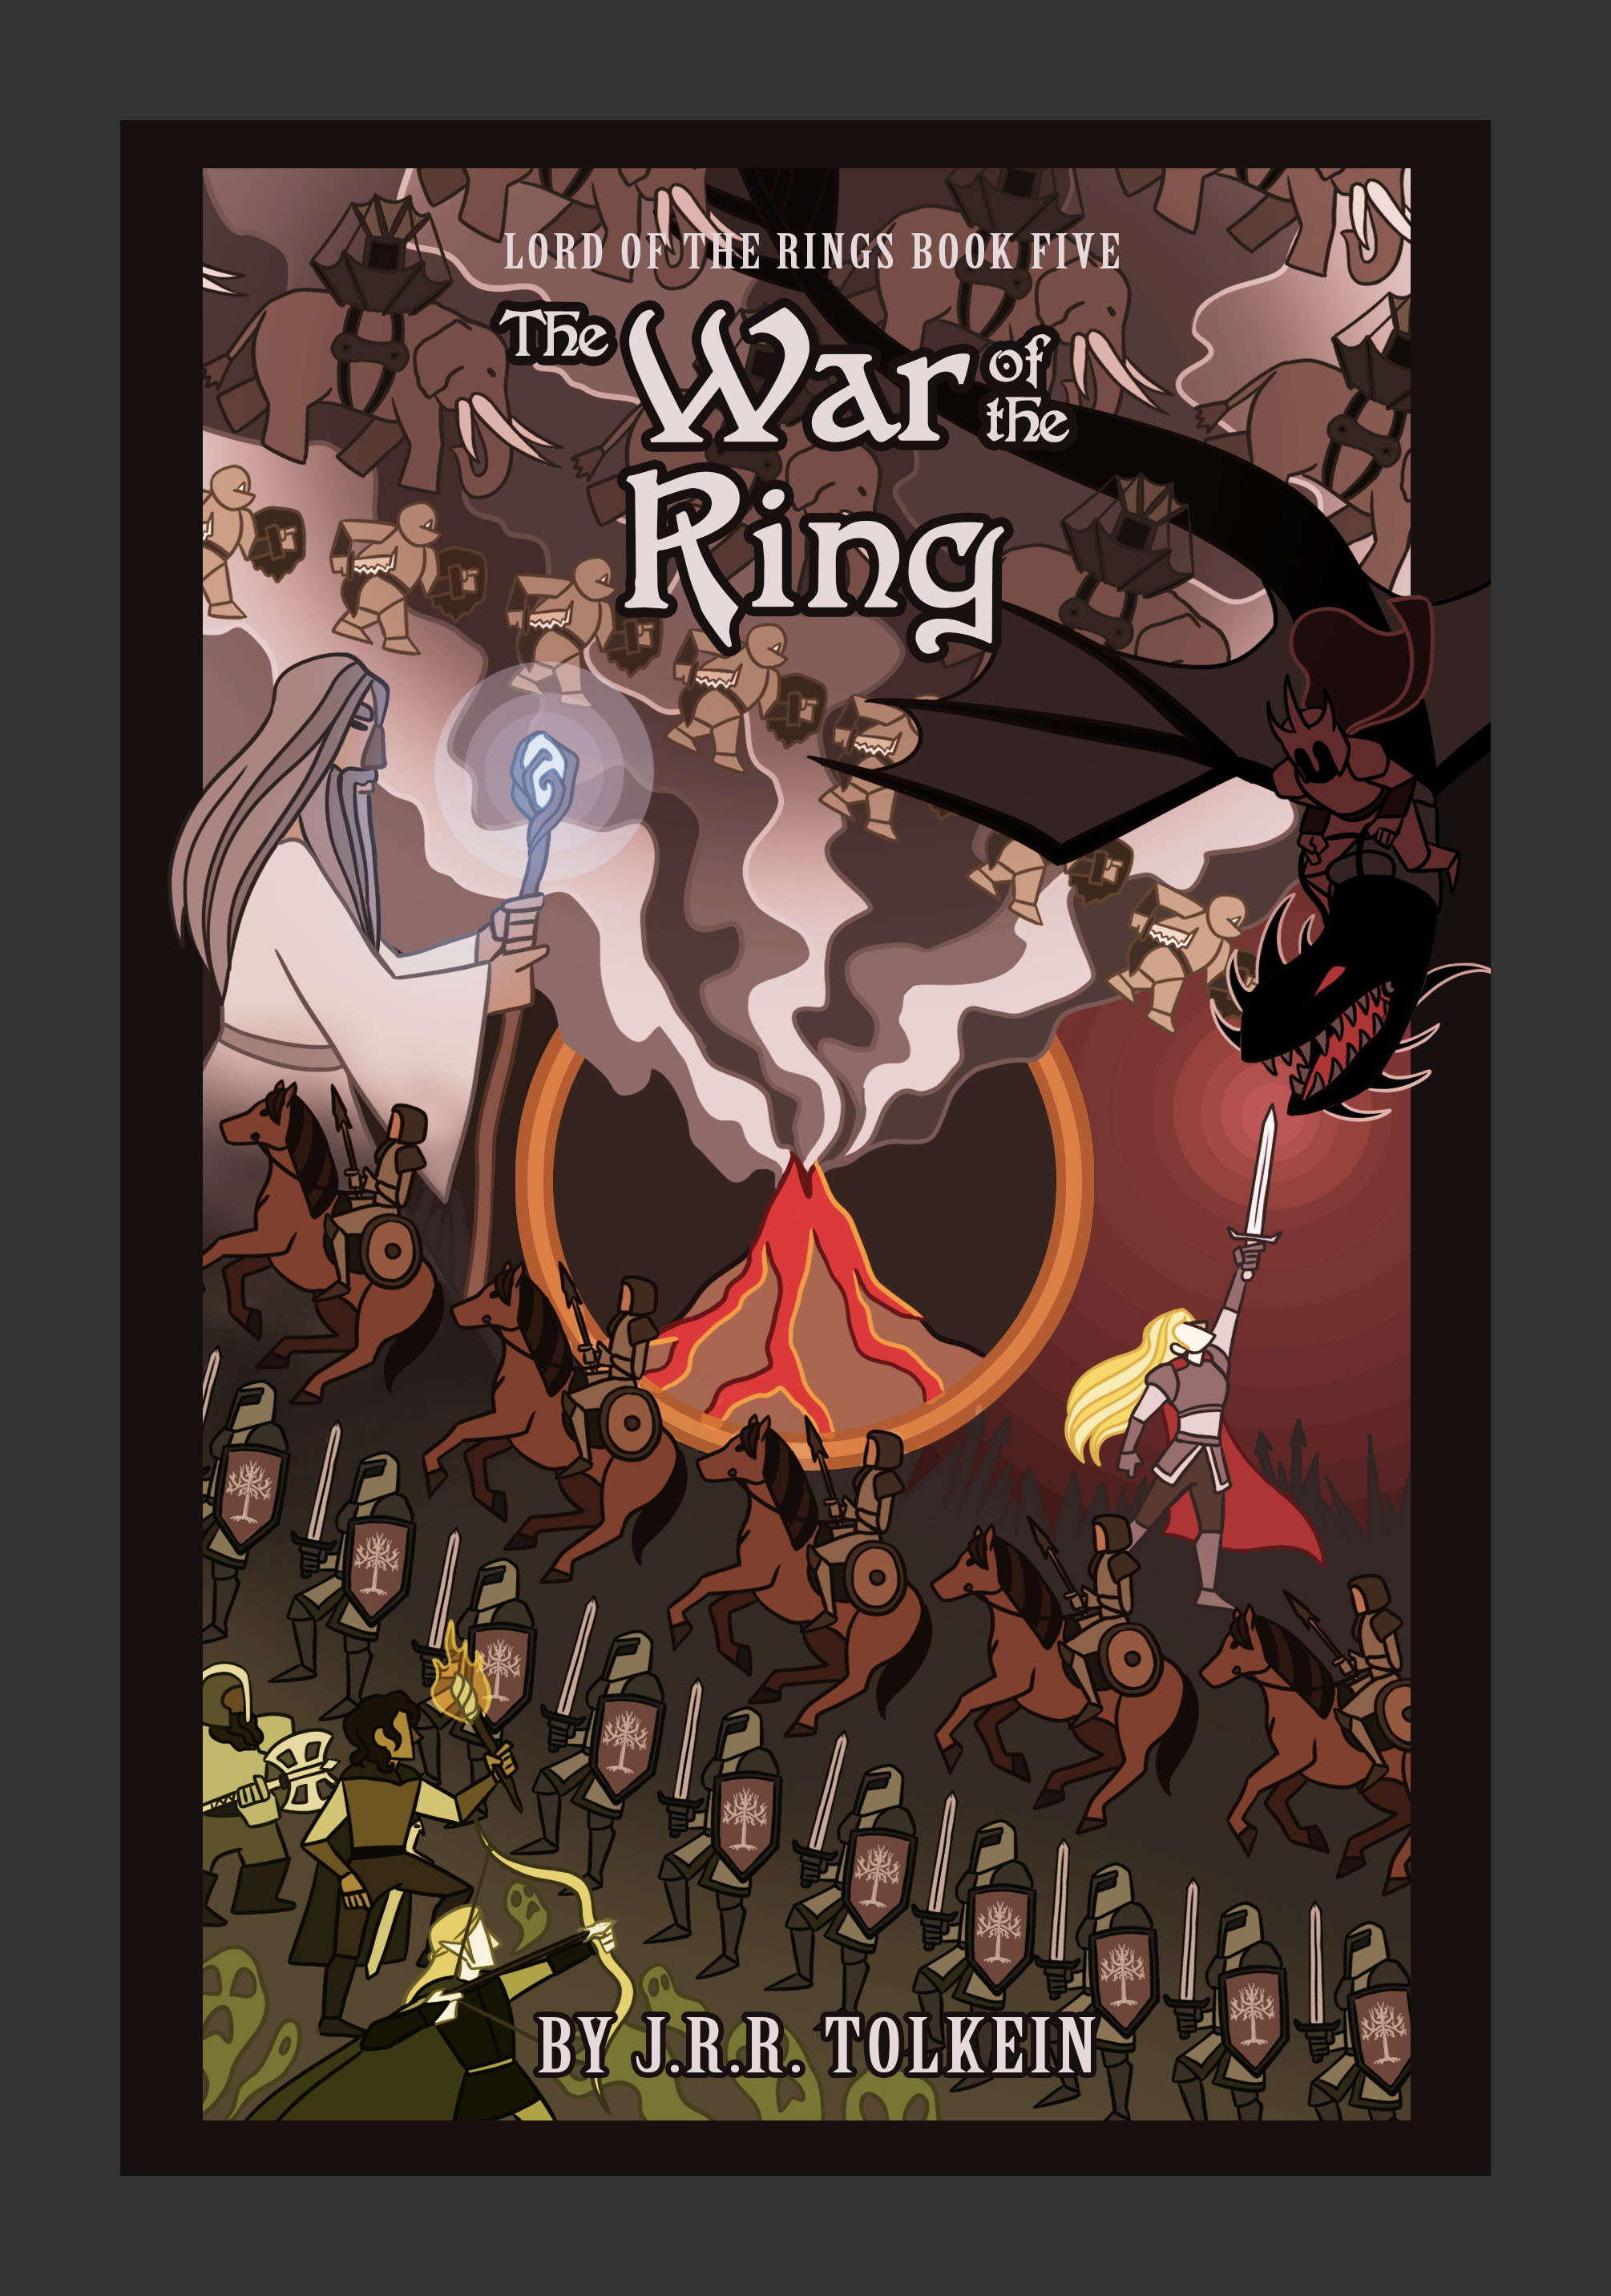 Cover for book five: The War of the Ring (first half of The Return of the King)